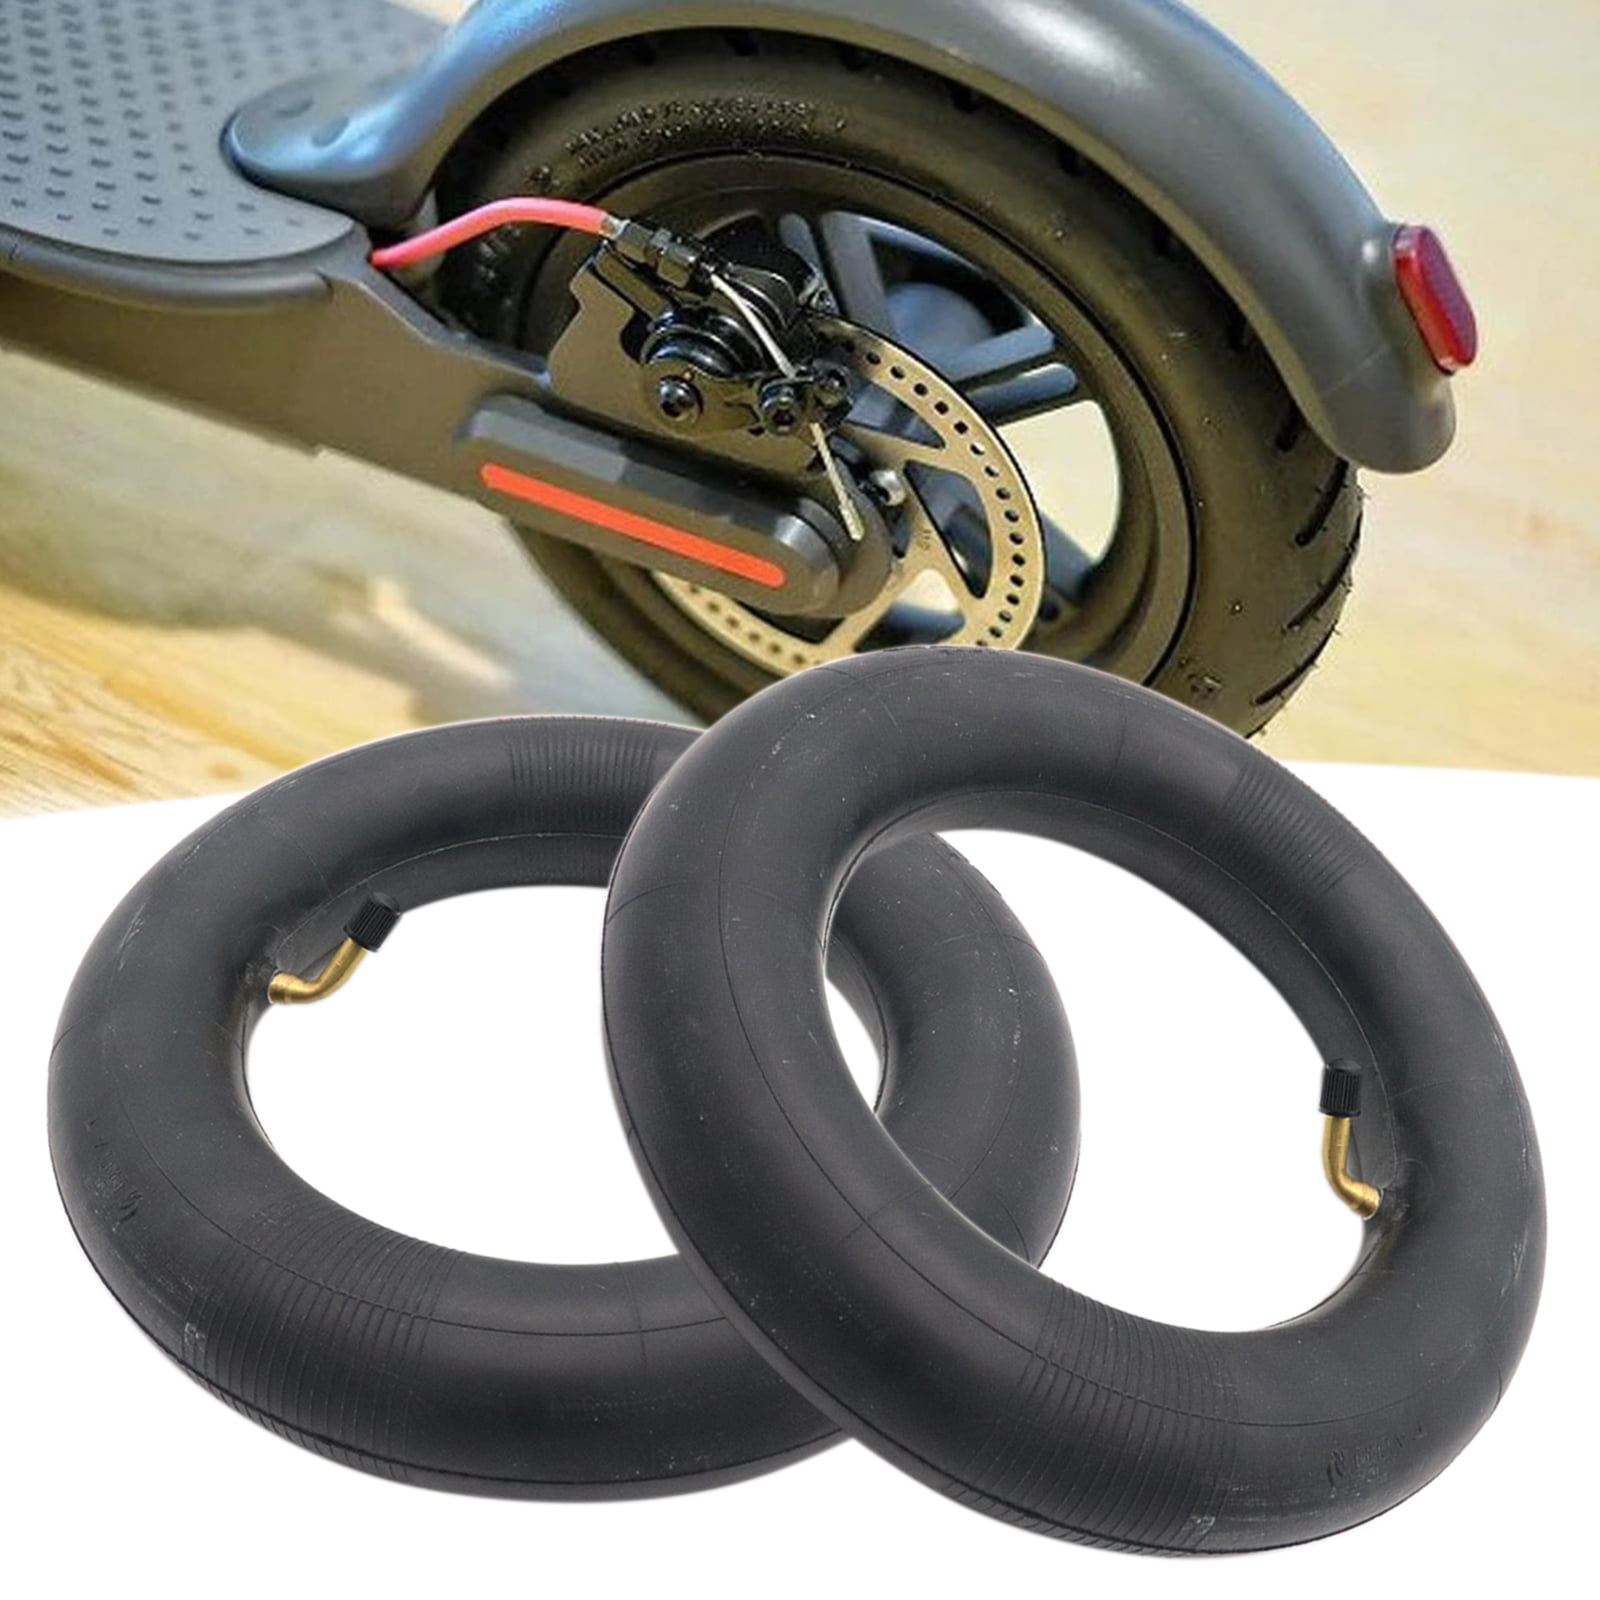 Black Vacuum Tire Inner Tube 10x2.50 Bent Extended Valve For Electric Scooters 